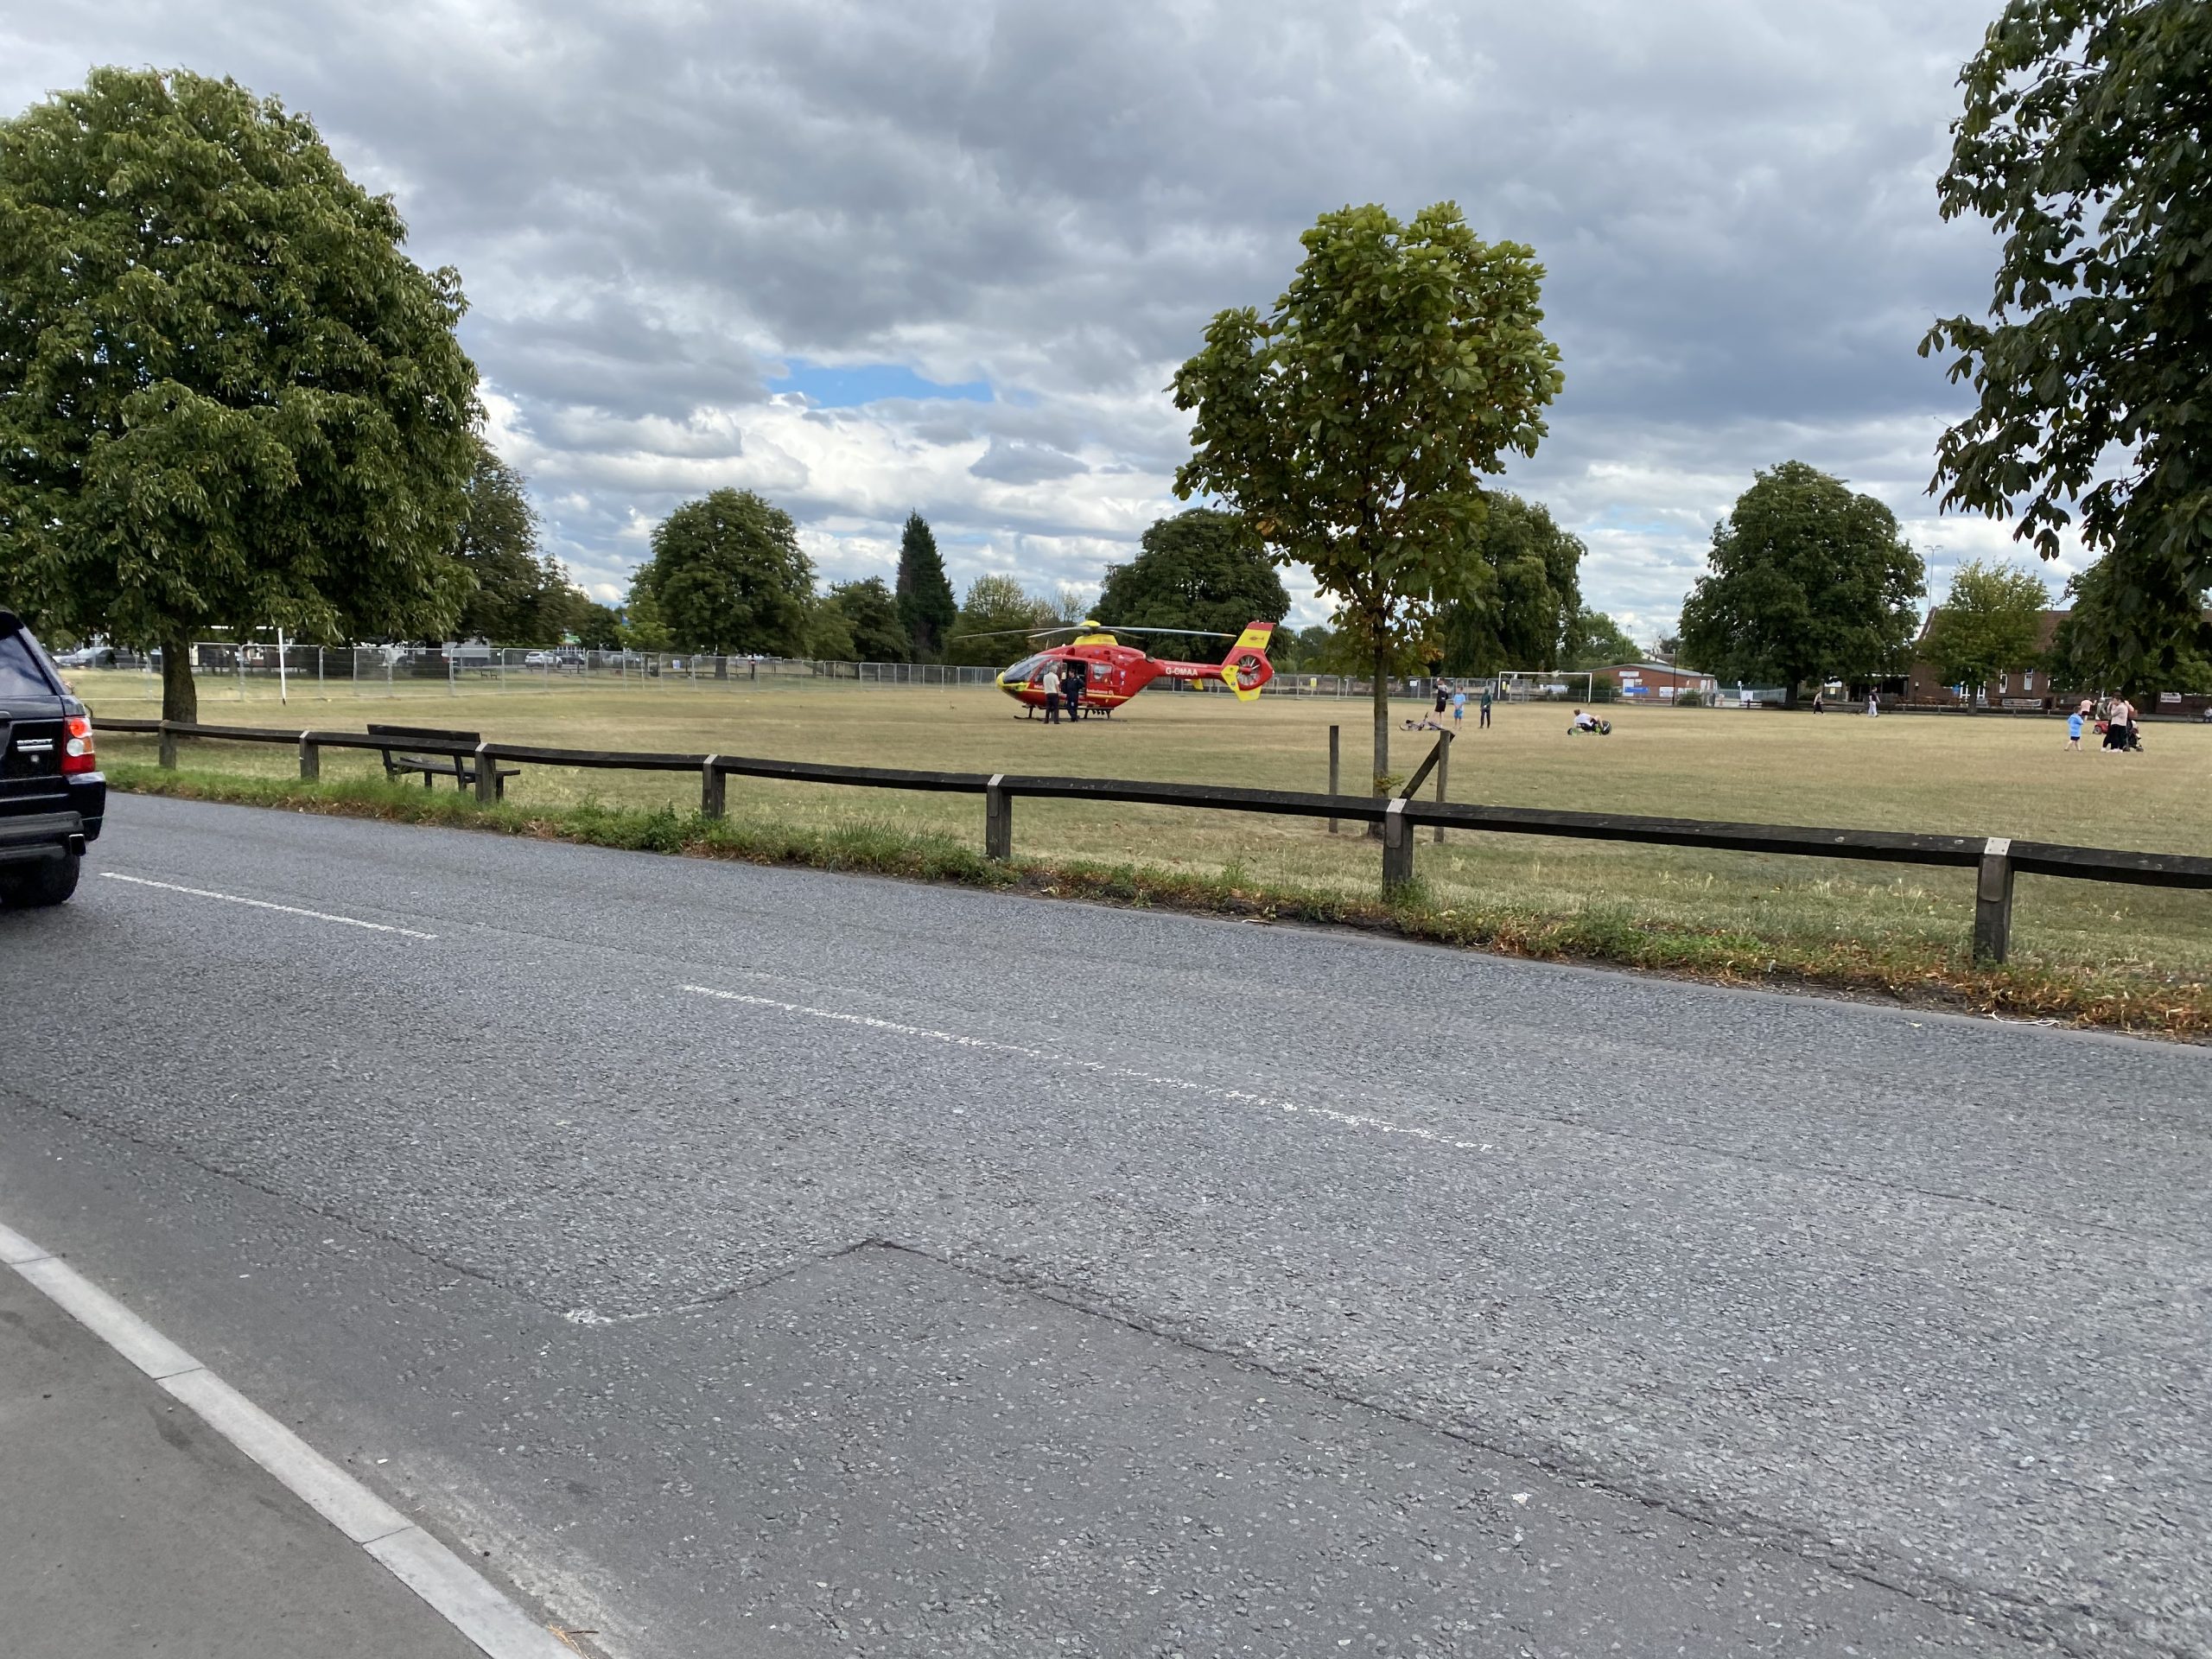 NEWS | Air ambulance called to incident in Hereford